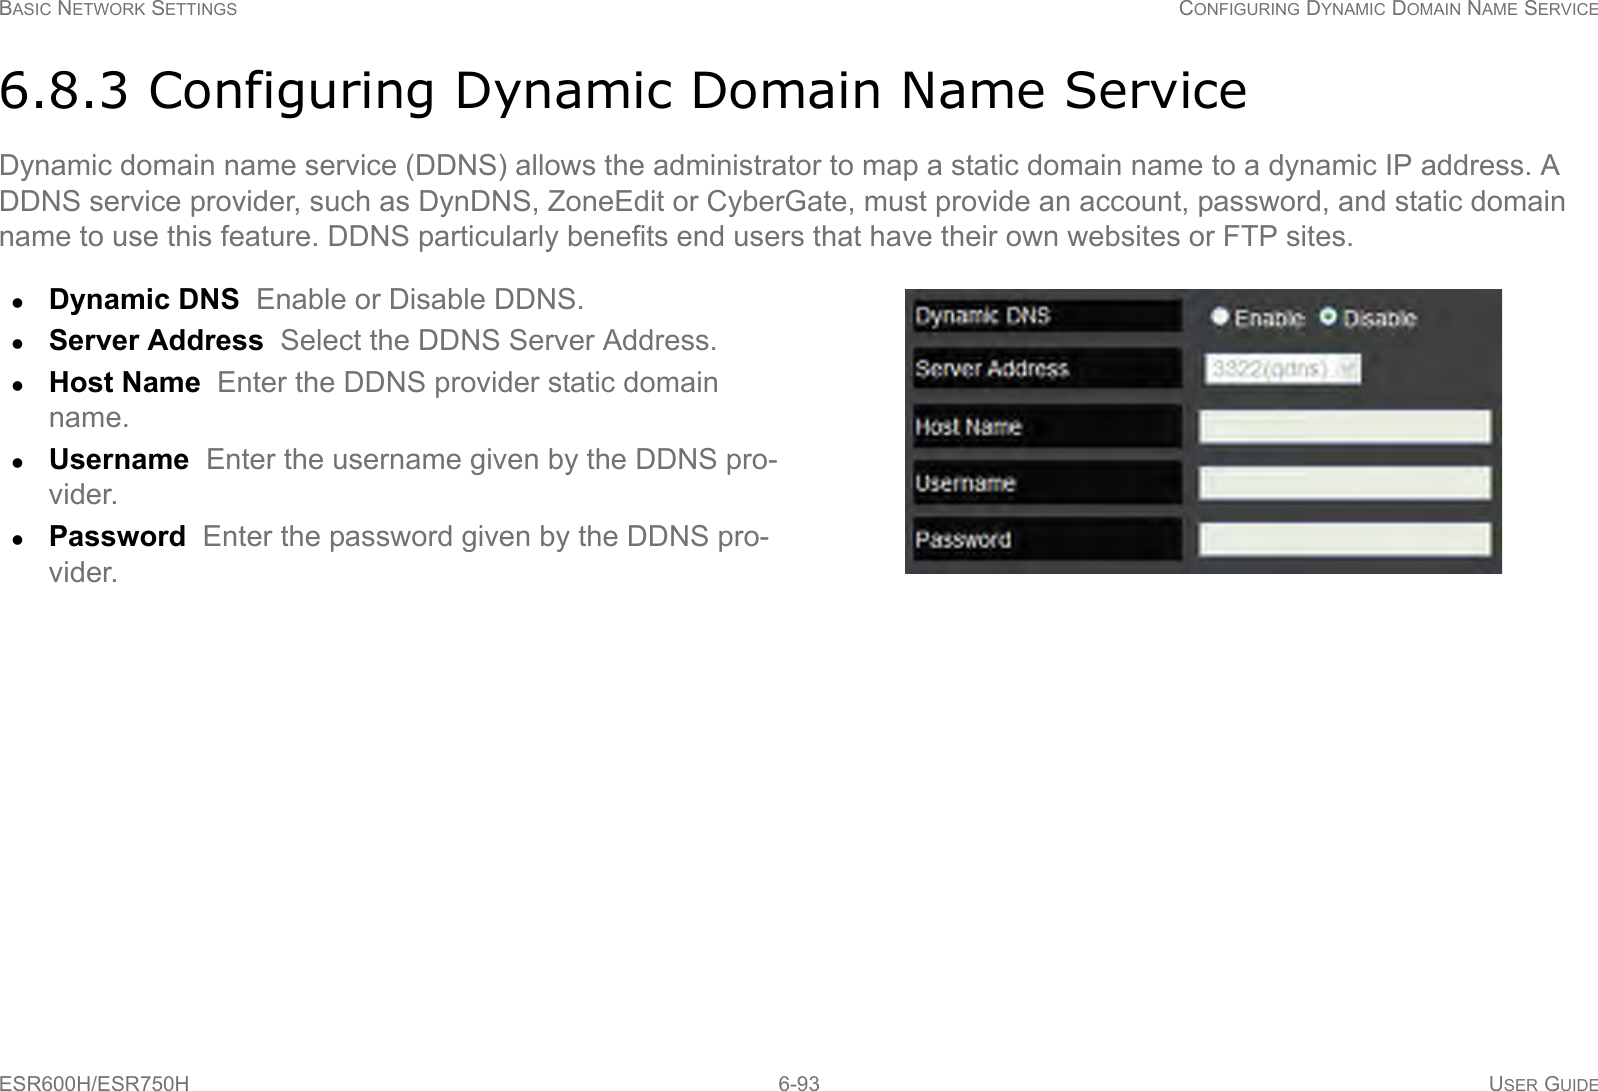 BASIC NETWORK SETTINGS CONFIGURING DYNAMIC DOMAIN NAME SERVICEESR600H/ESR750H 6-93 USER GUIDE6.8.3 Configuring Dynamic Domain Name ServiceDynamic domain name service (DDNS) allows the administrator to map a static domain name to a dynamic IP address. A  DDNS service provider, such as DynDNS, ZoneEdit or CyberGate, must provide an account, password, and static domain name to use this feature. DDNS particularly benefits end users that have their own websites or FTP sites.Dynamic DNS  Enable or Disable DDNS.Server Address  Select the DDNS Server Address.Host Name  Enter the DDNS provider static domain name.Username  Enter the username given by the DDNS pro-vider.Password  Enter the password given by the DDNS pro-vider.